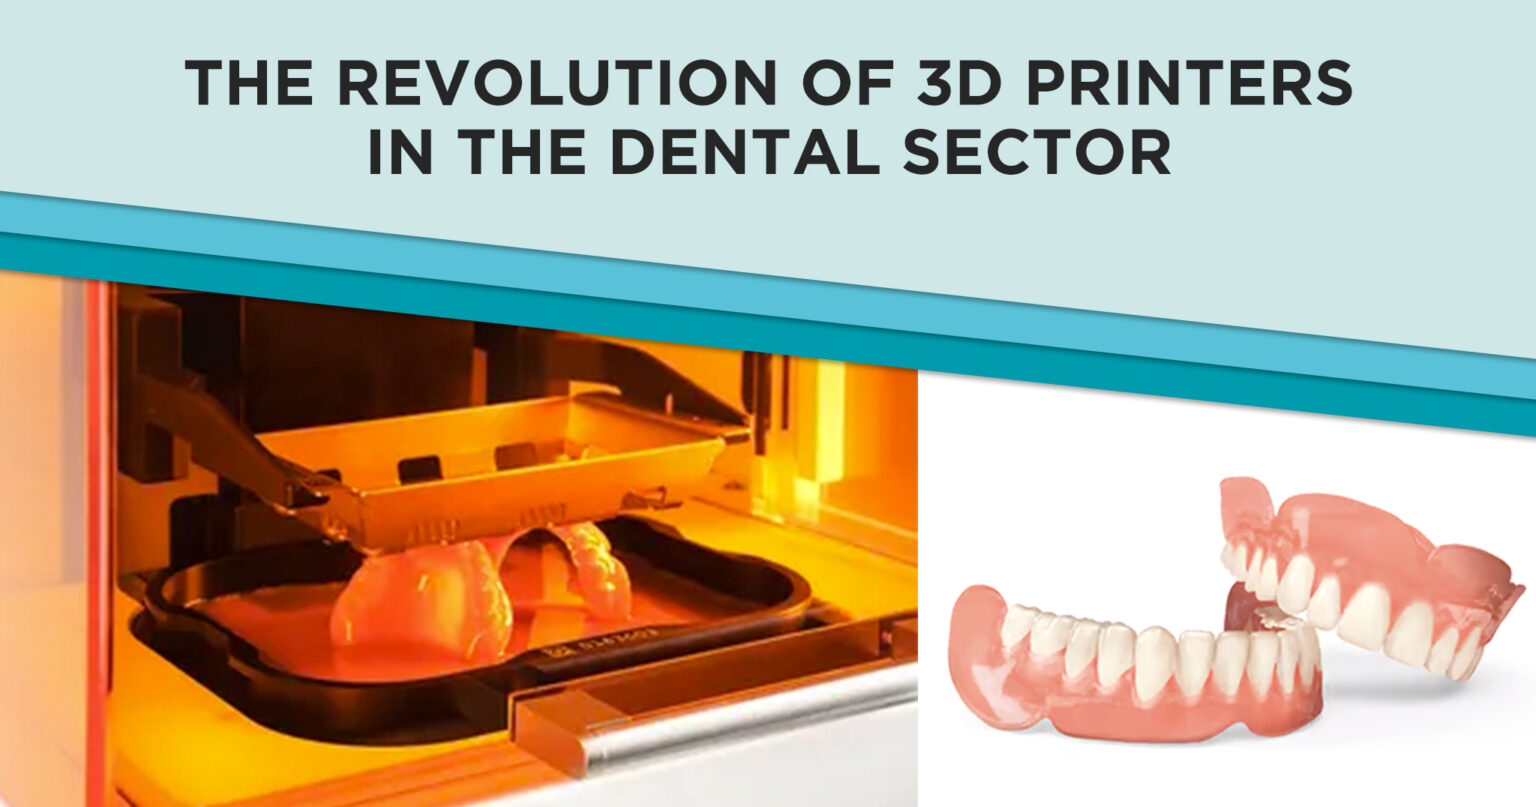 THE-REVOLUTION-OF-3D-PRINTERS-IN-THE-DENTAL-SECTOR_2-1536x807